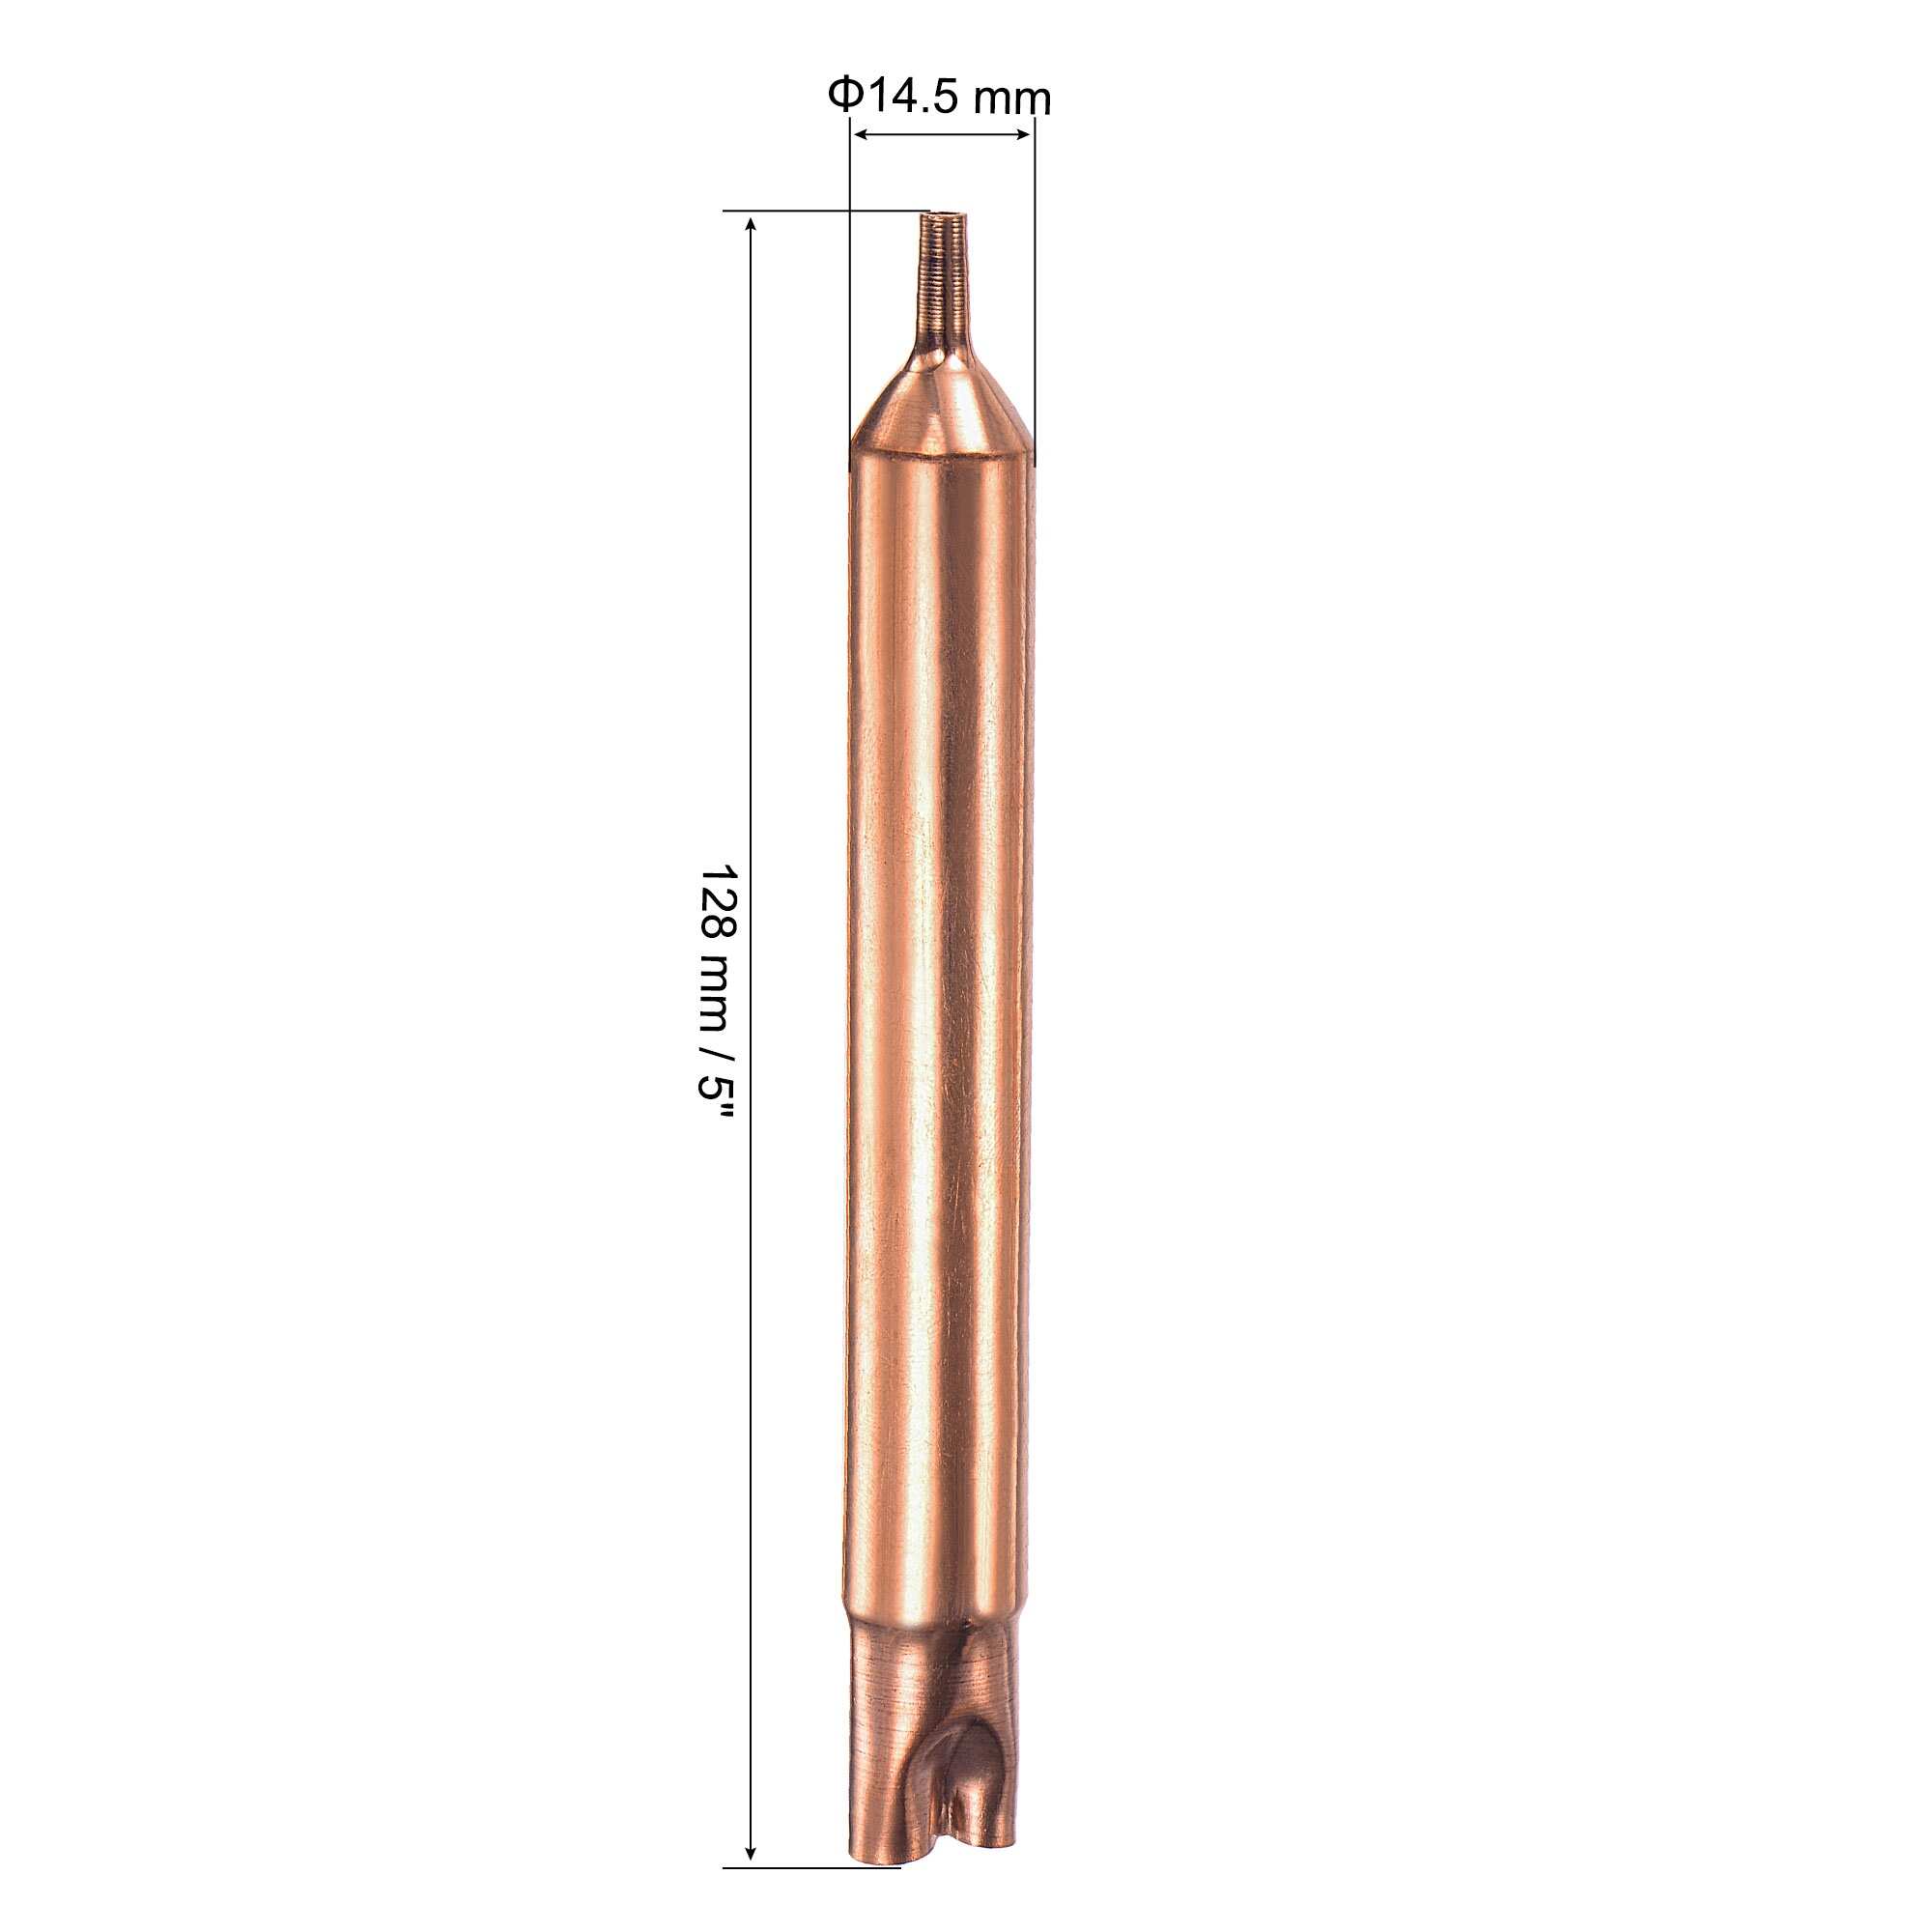 Copper Refrigerator Filter Dryer with 2 End - 18.4 x 129mm